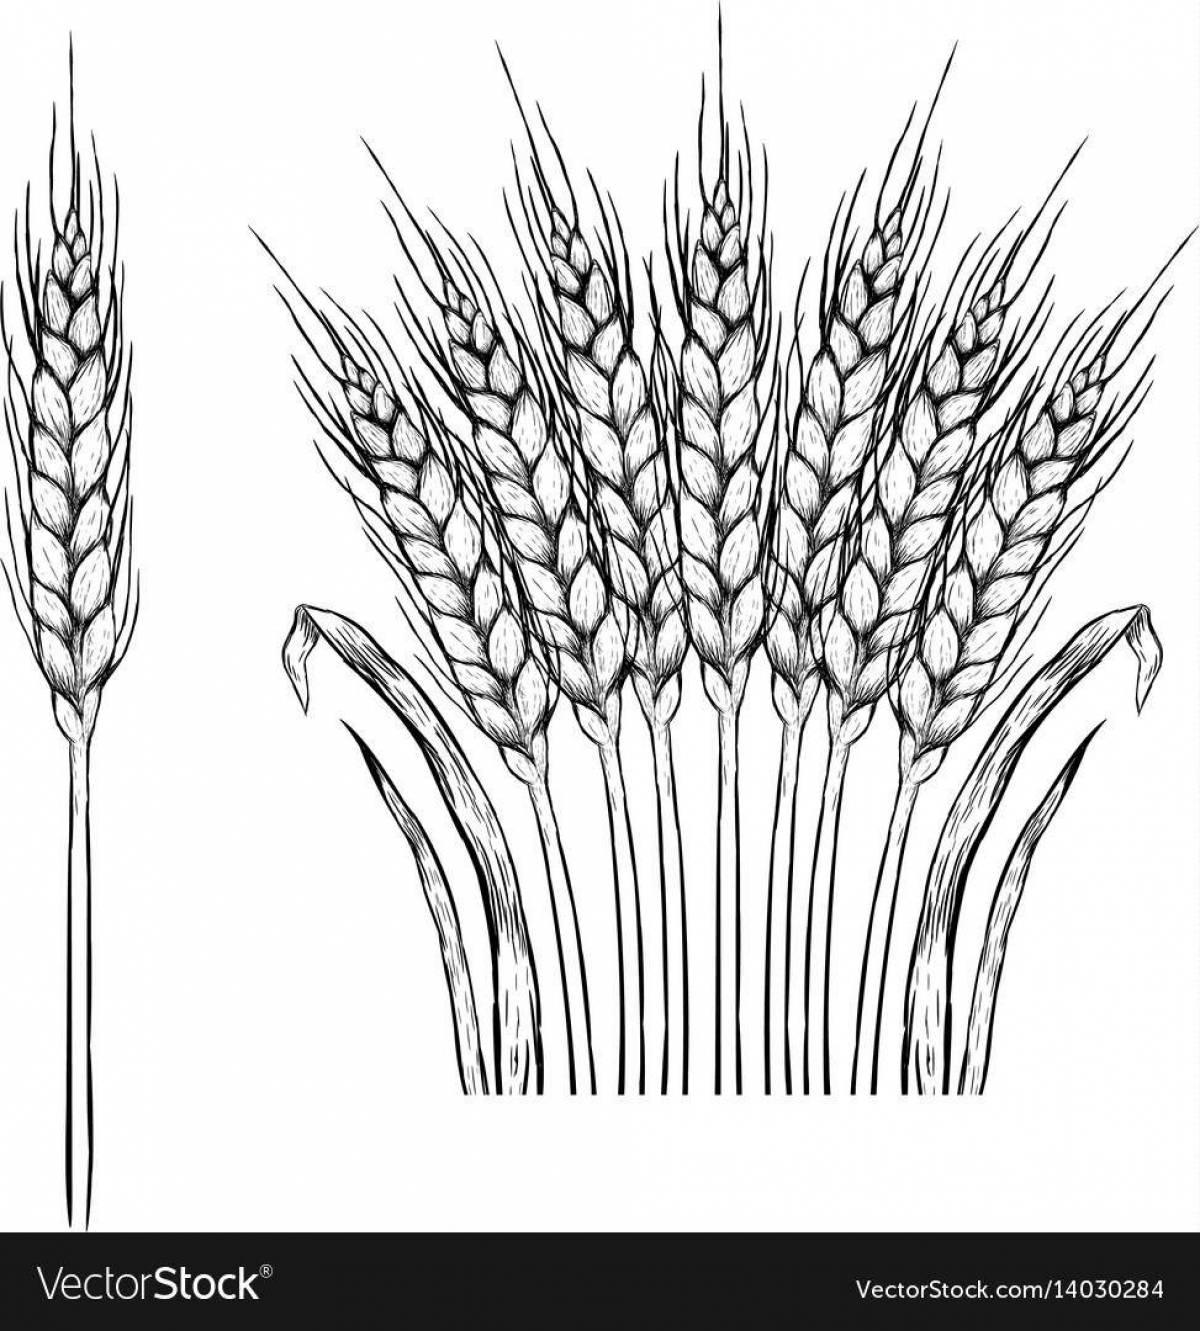 Cute wheat ear coloring for kids